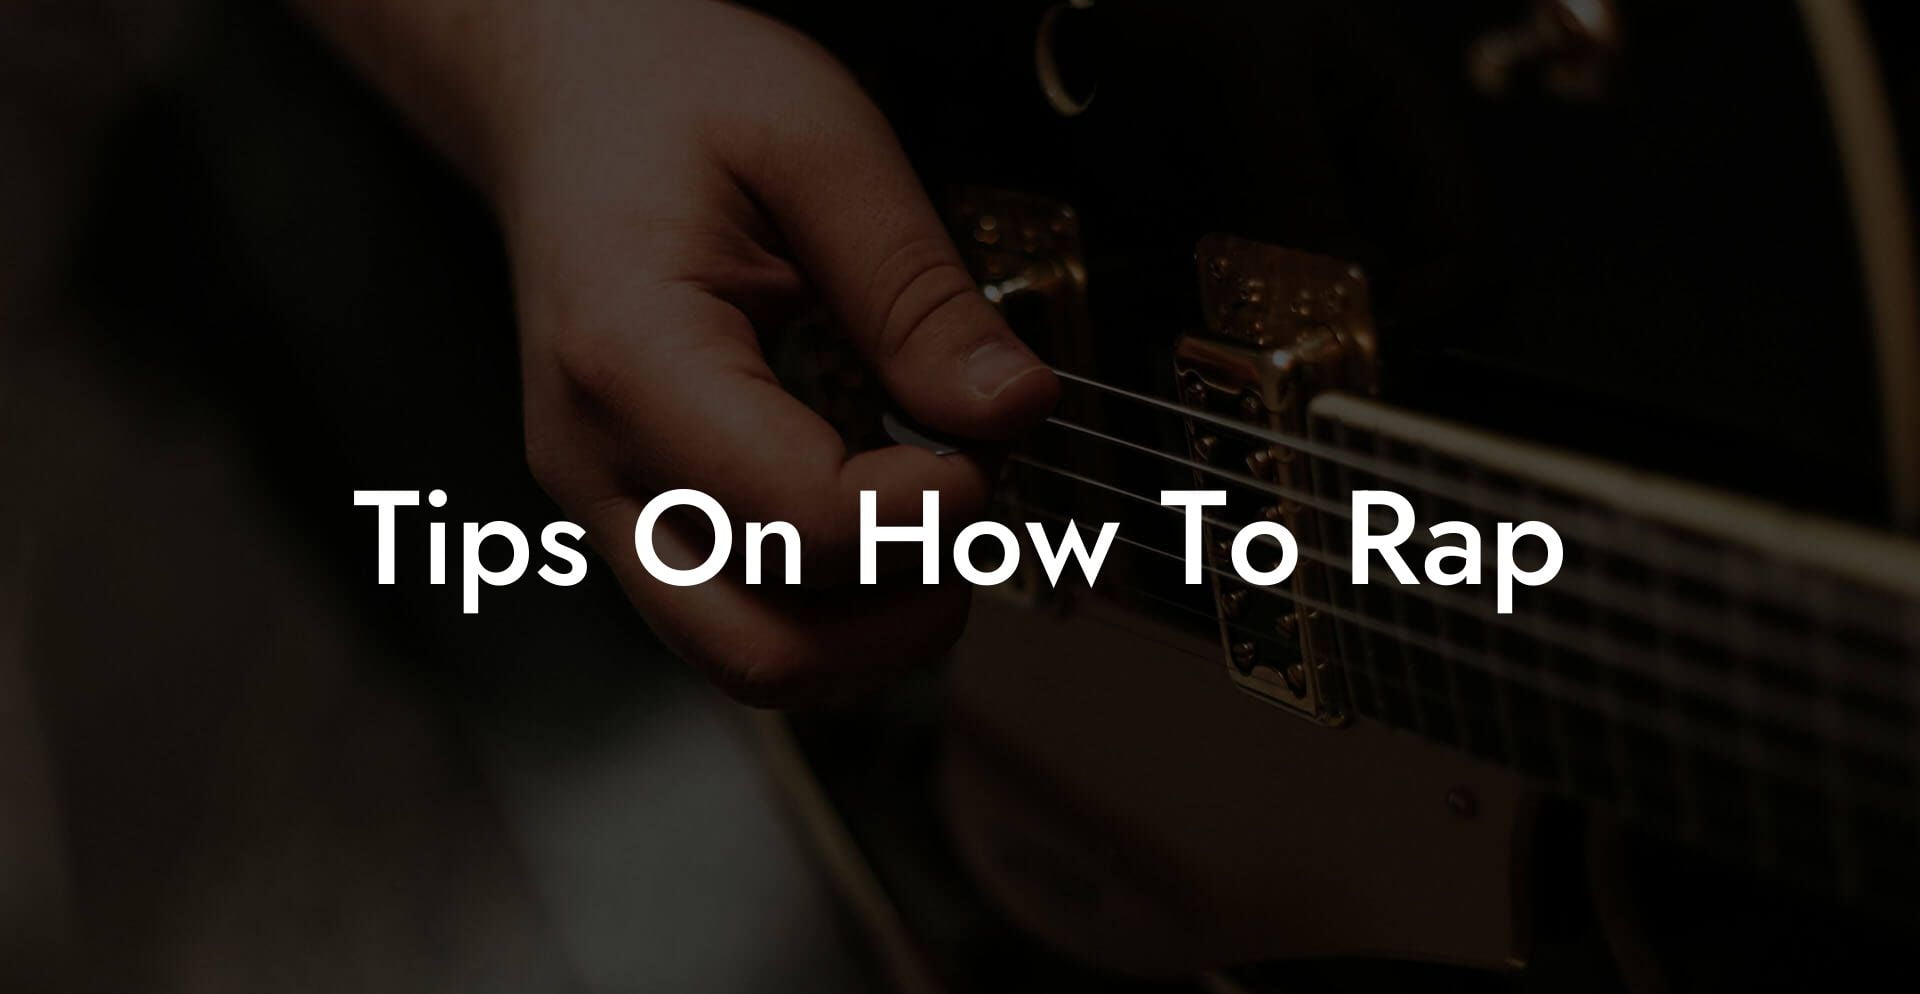 tips on how to rap lyric assistant